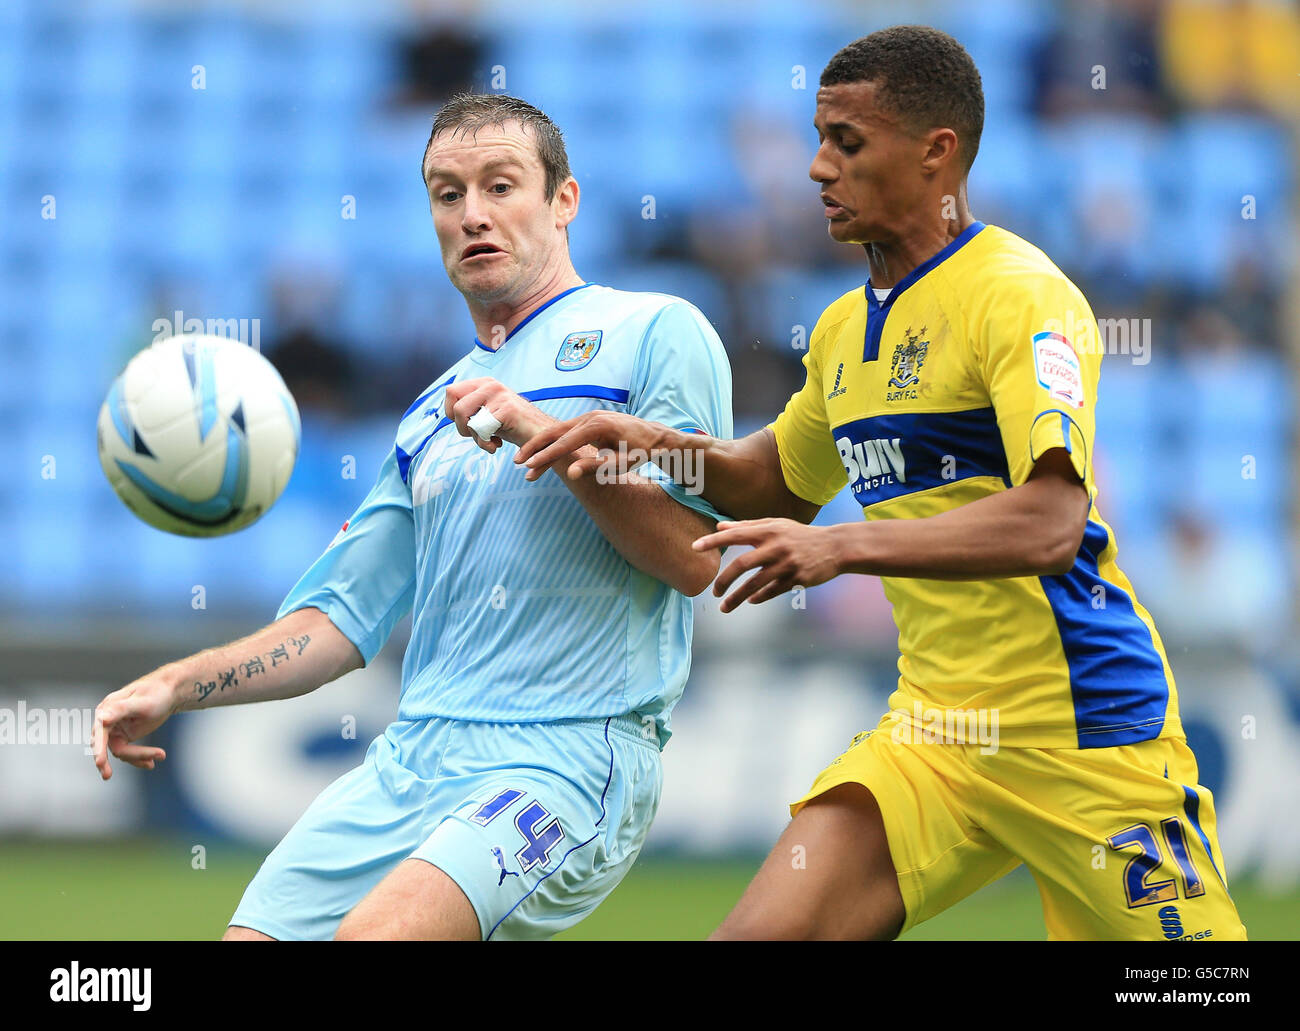 Coventry City's Stephen Elliott and Bury's Andrai Jones in action during the npower Football League One match at the Ricoh Arena, Coventry. Stock Photo